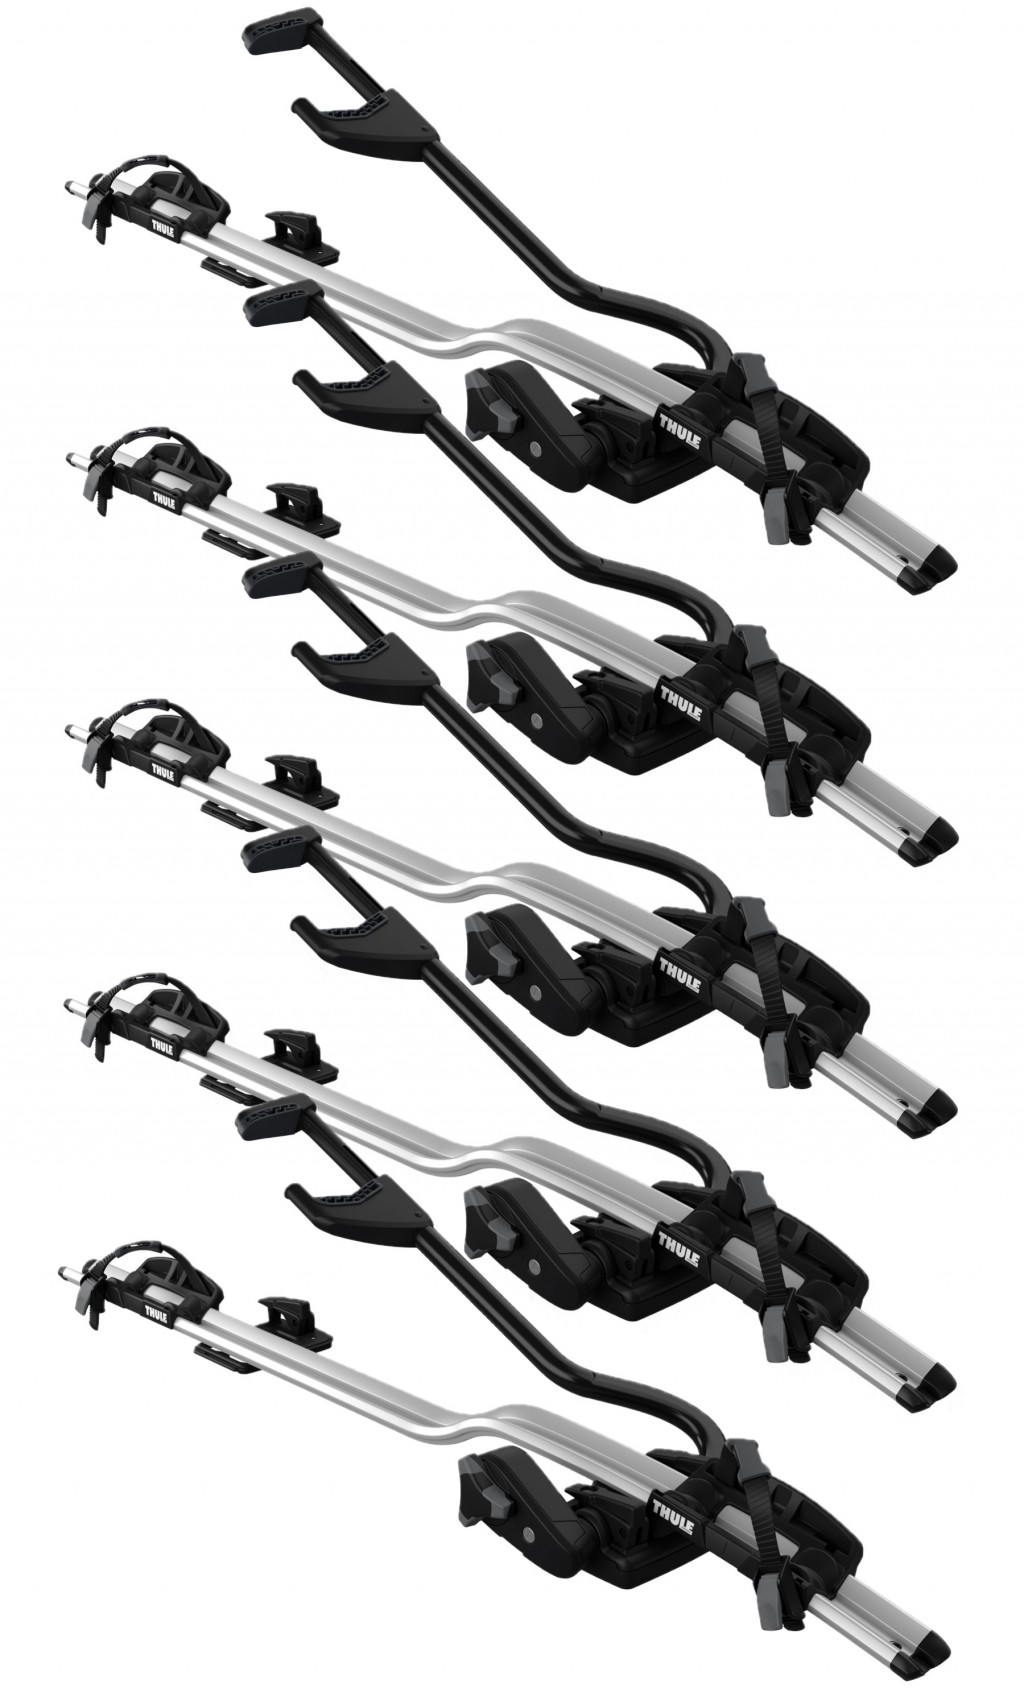 Thule 598 ProRide (5 pack)